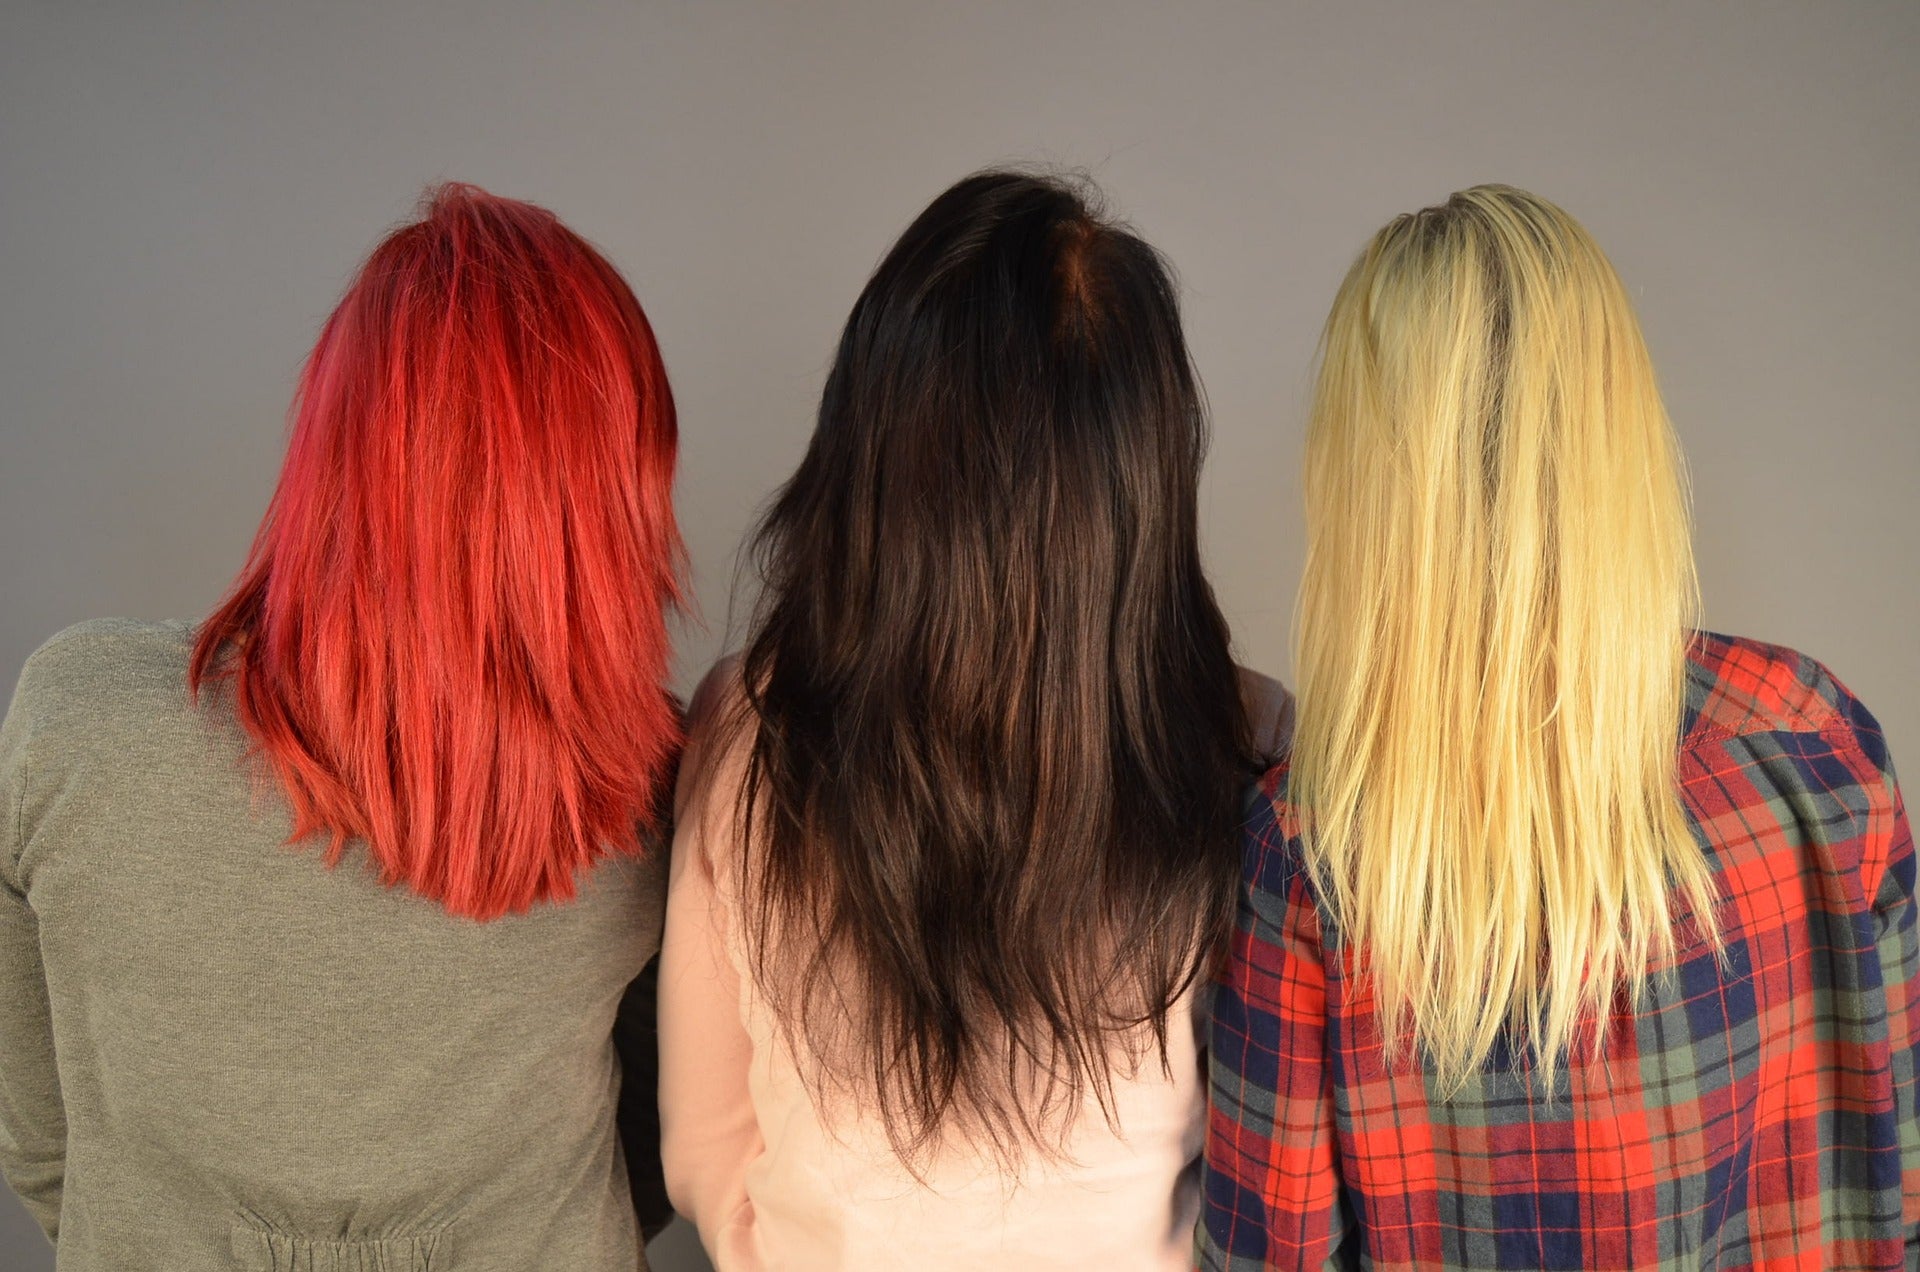 Choosing the right hair color